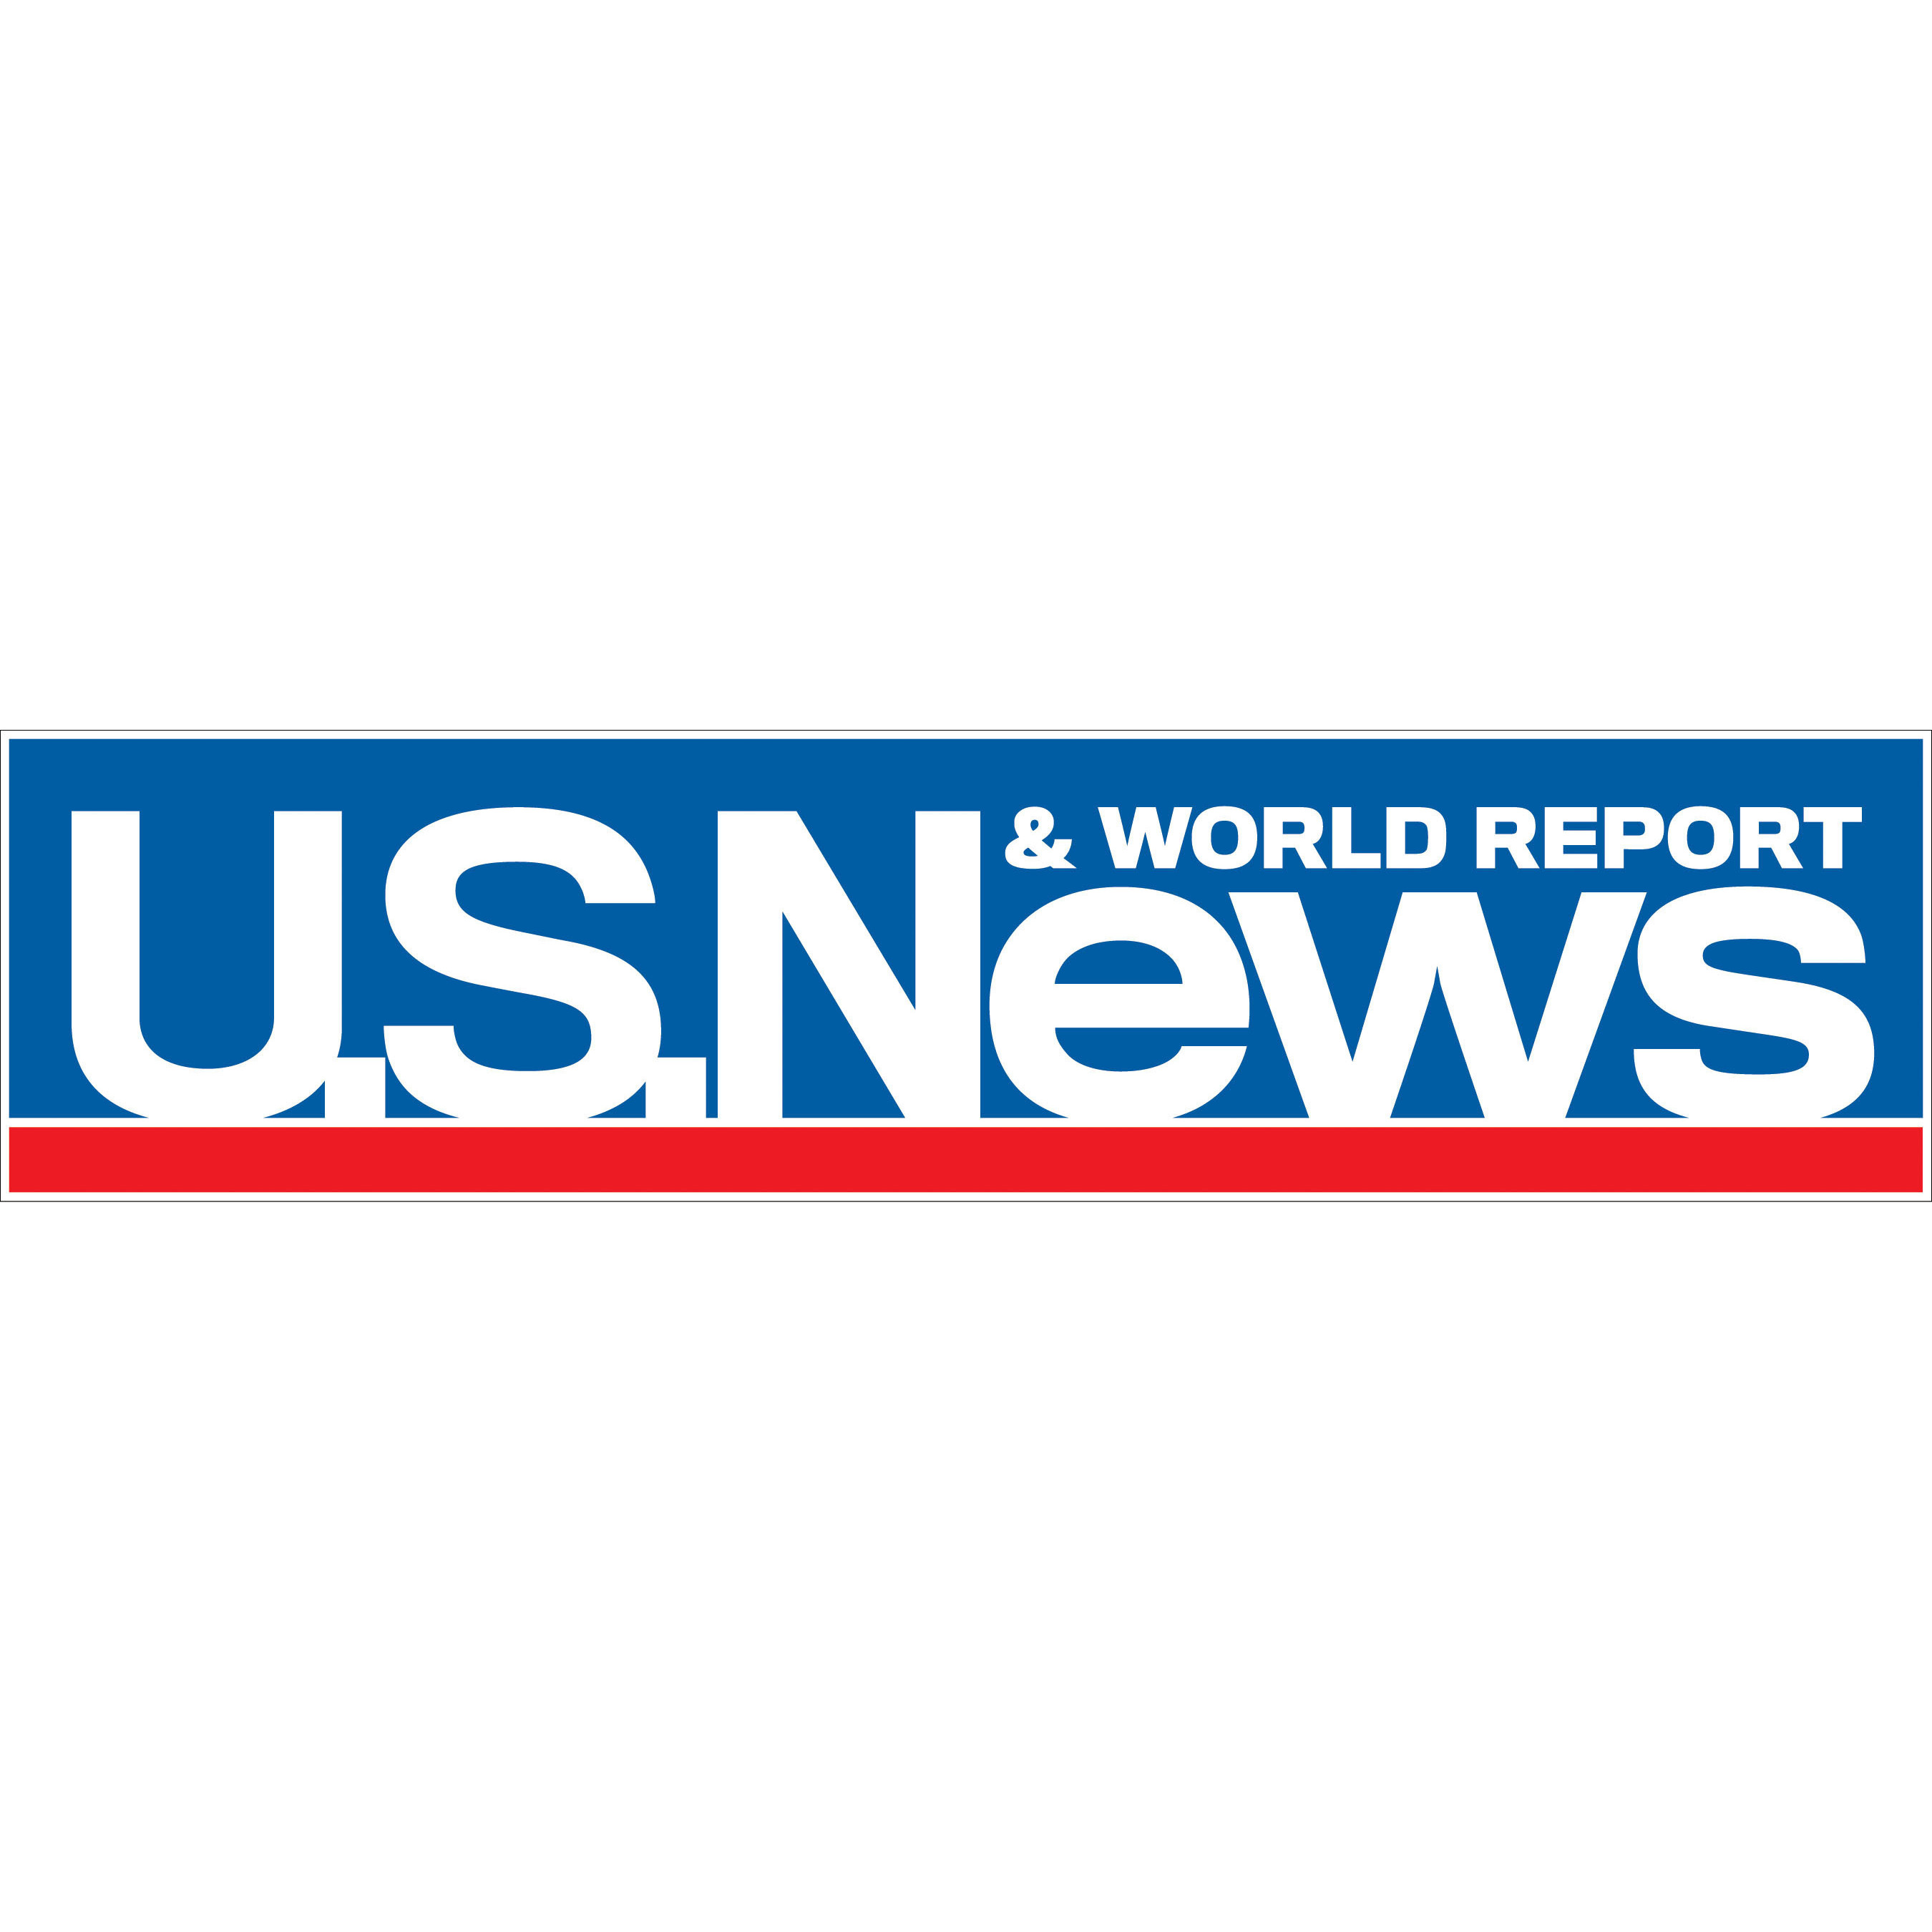 This is the logo for US News & World Report.